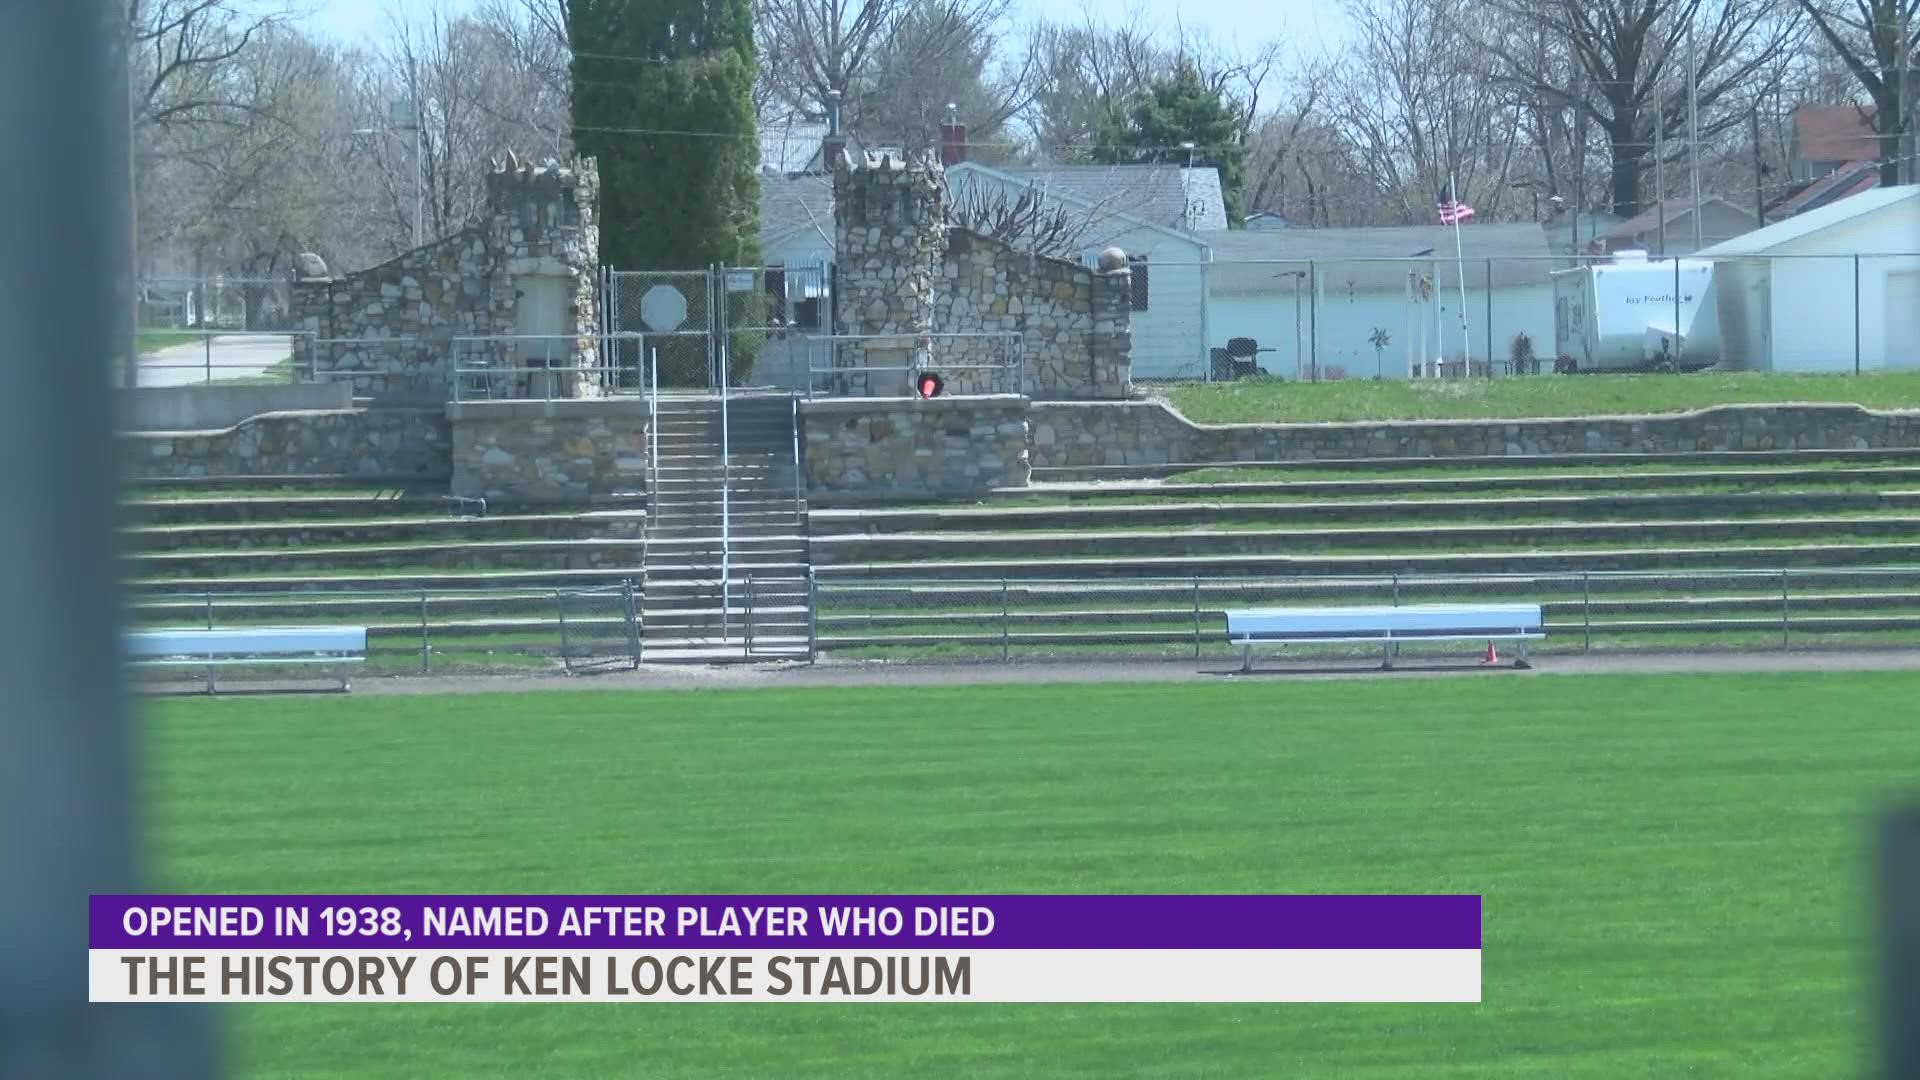 The Knoxville Community School District says they are still planning to use the stadium for the upcoming fall season.